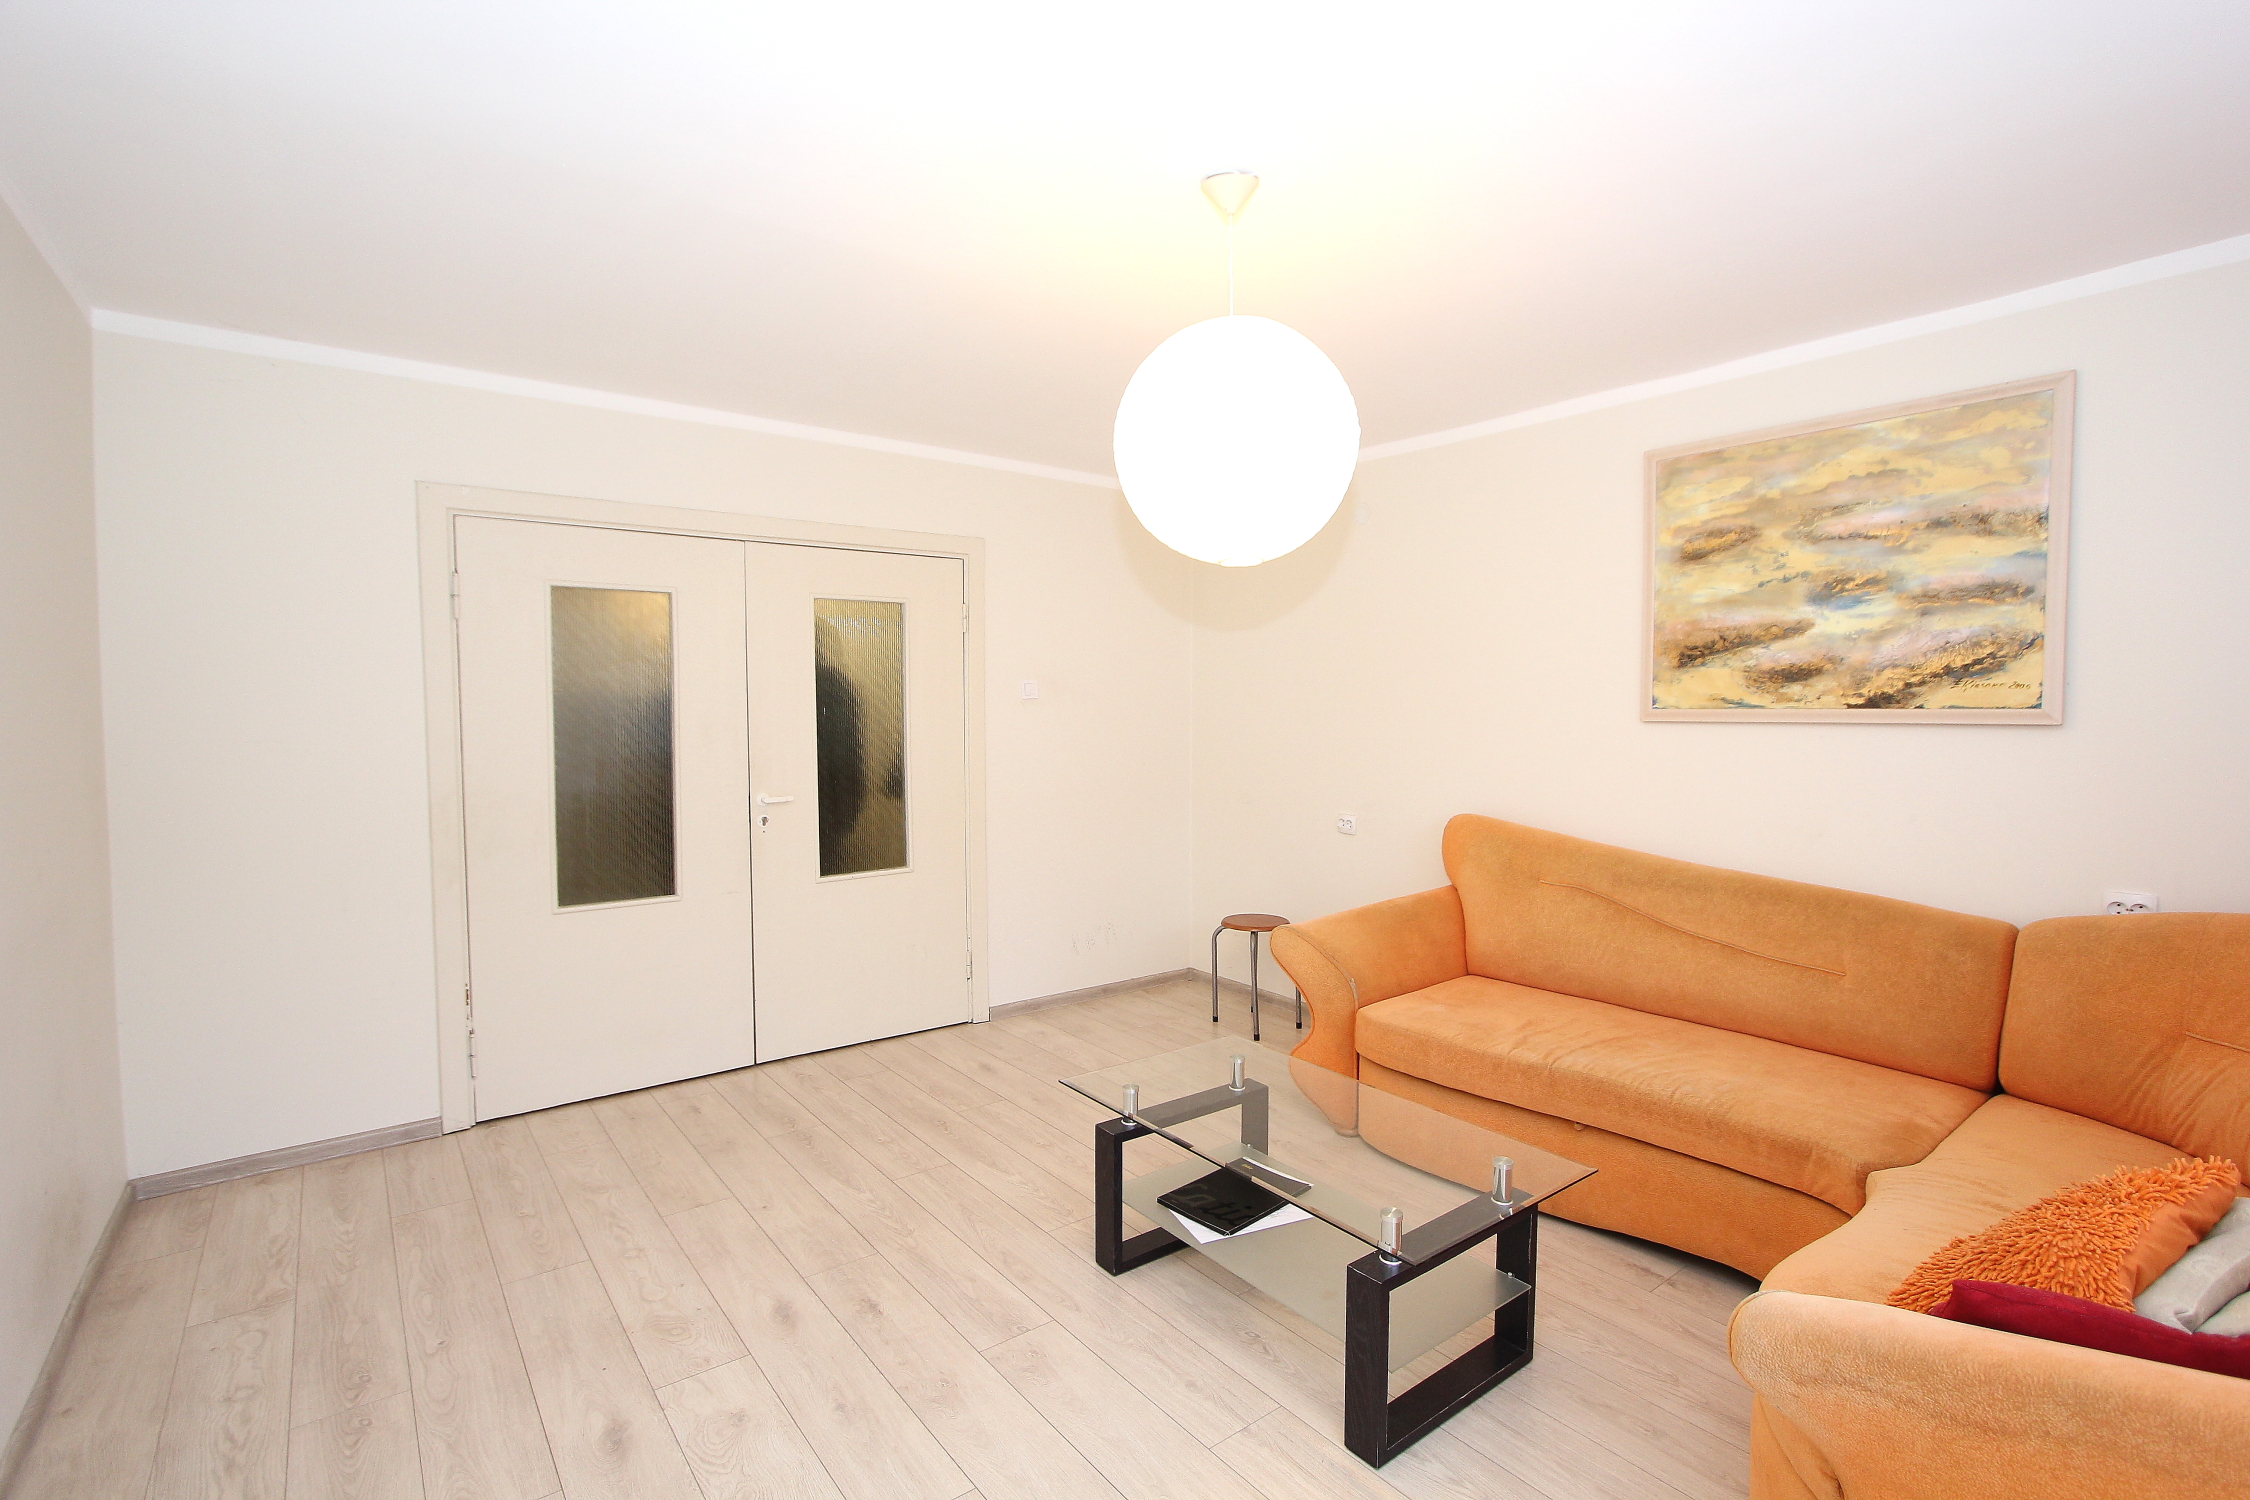 Apartment for rent, Nīcgales street 51/1 - Image 1